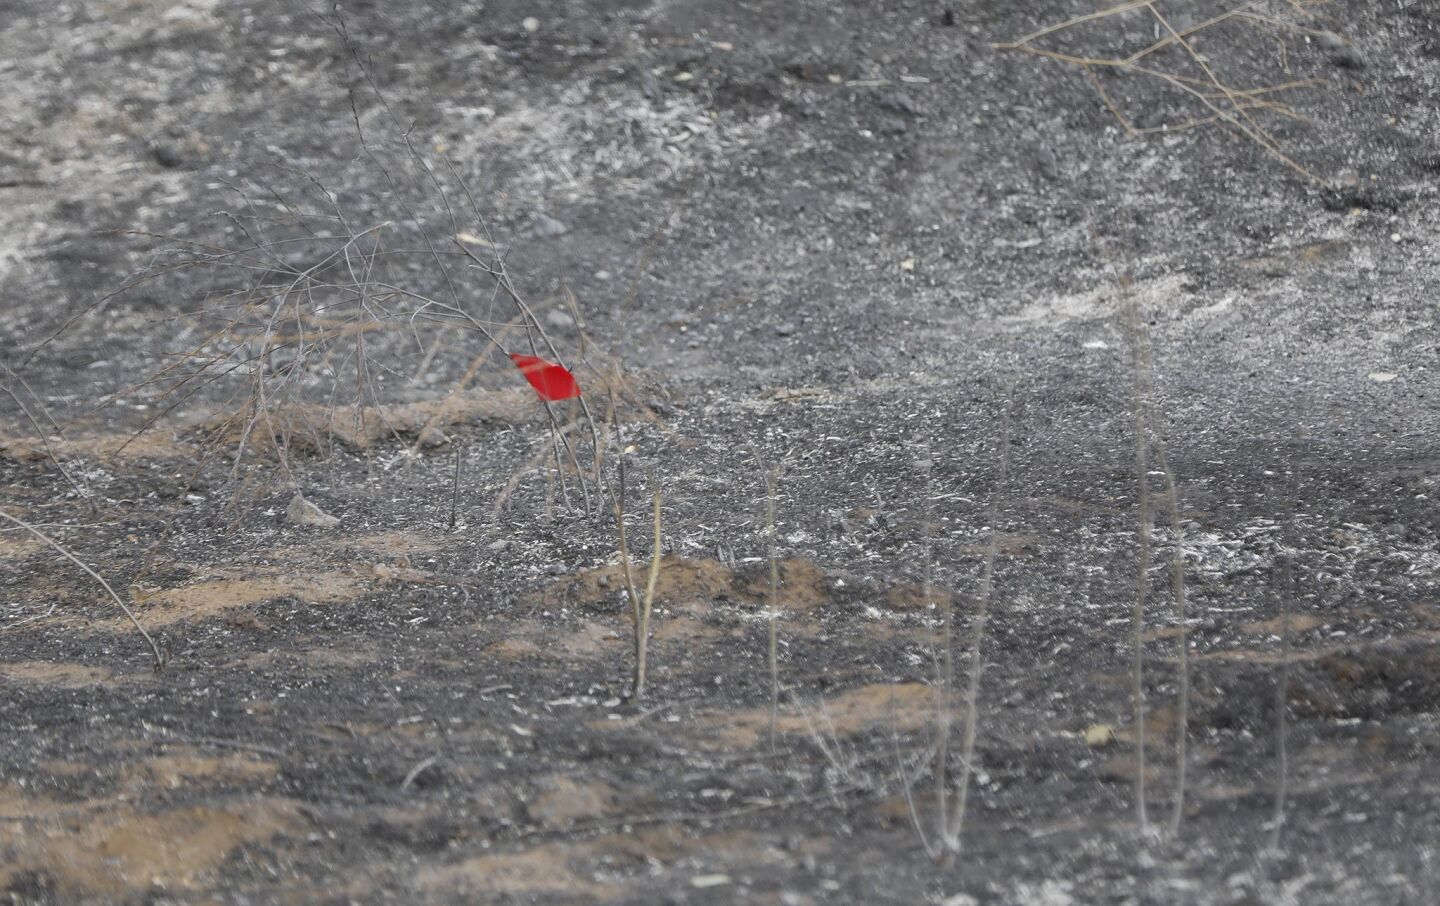 A red flag marks a spot along Alpine Boulevard near the West Willows Road offramp to Interstate 8, possibly where the West Fire started.